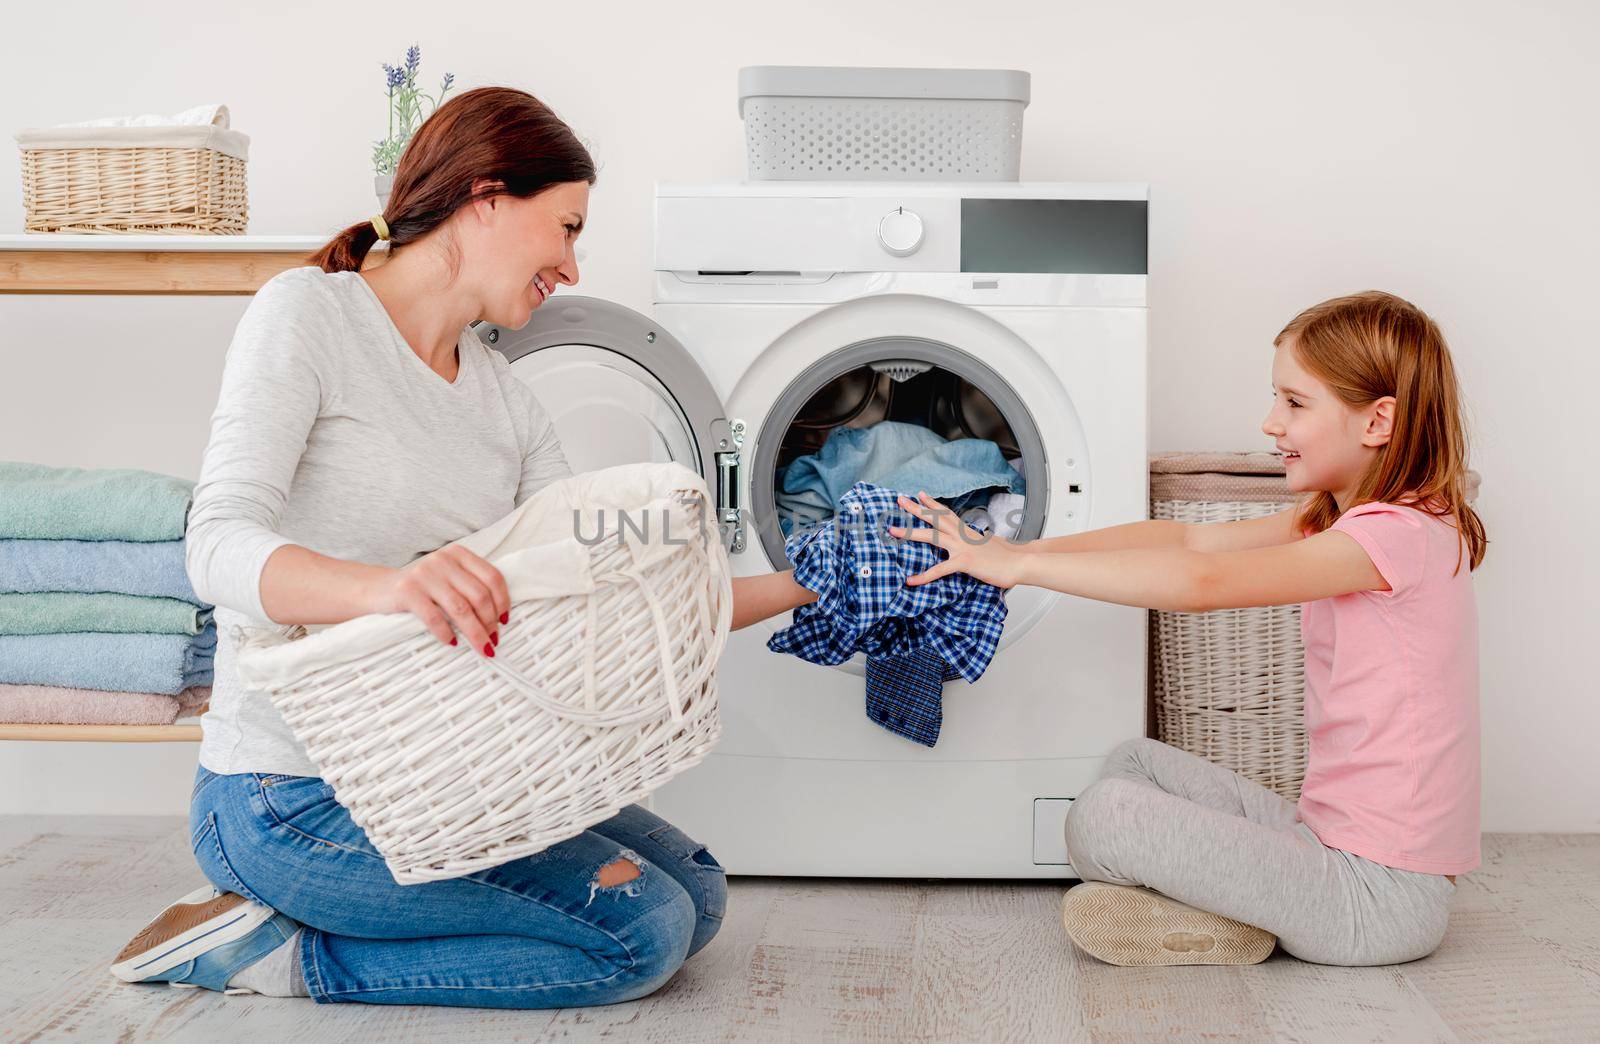 Happy mother and little daughter washing clothes using machine in light room